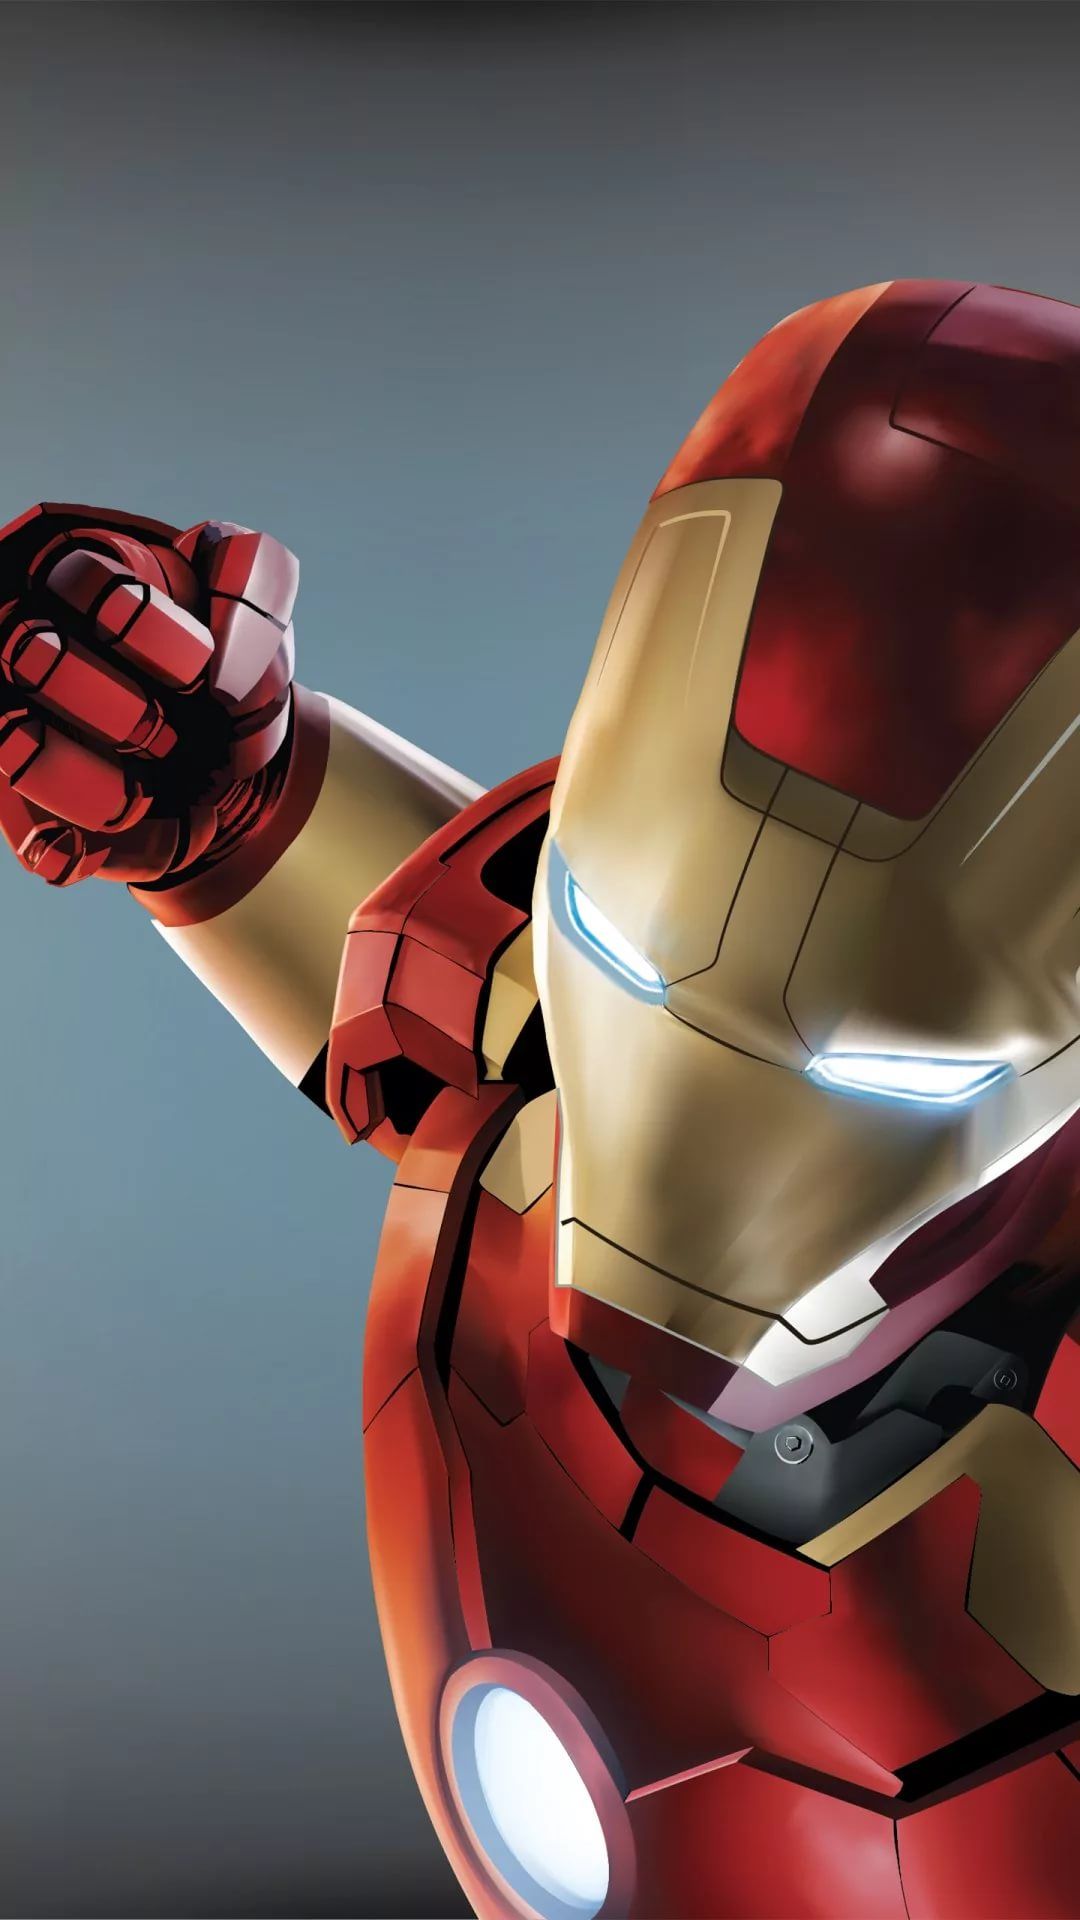 Hd Wallpaper Of Iron Man For Mobile